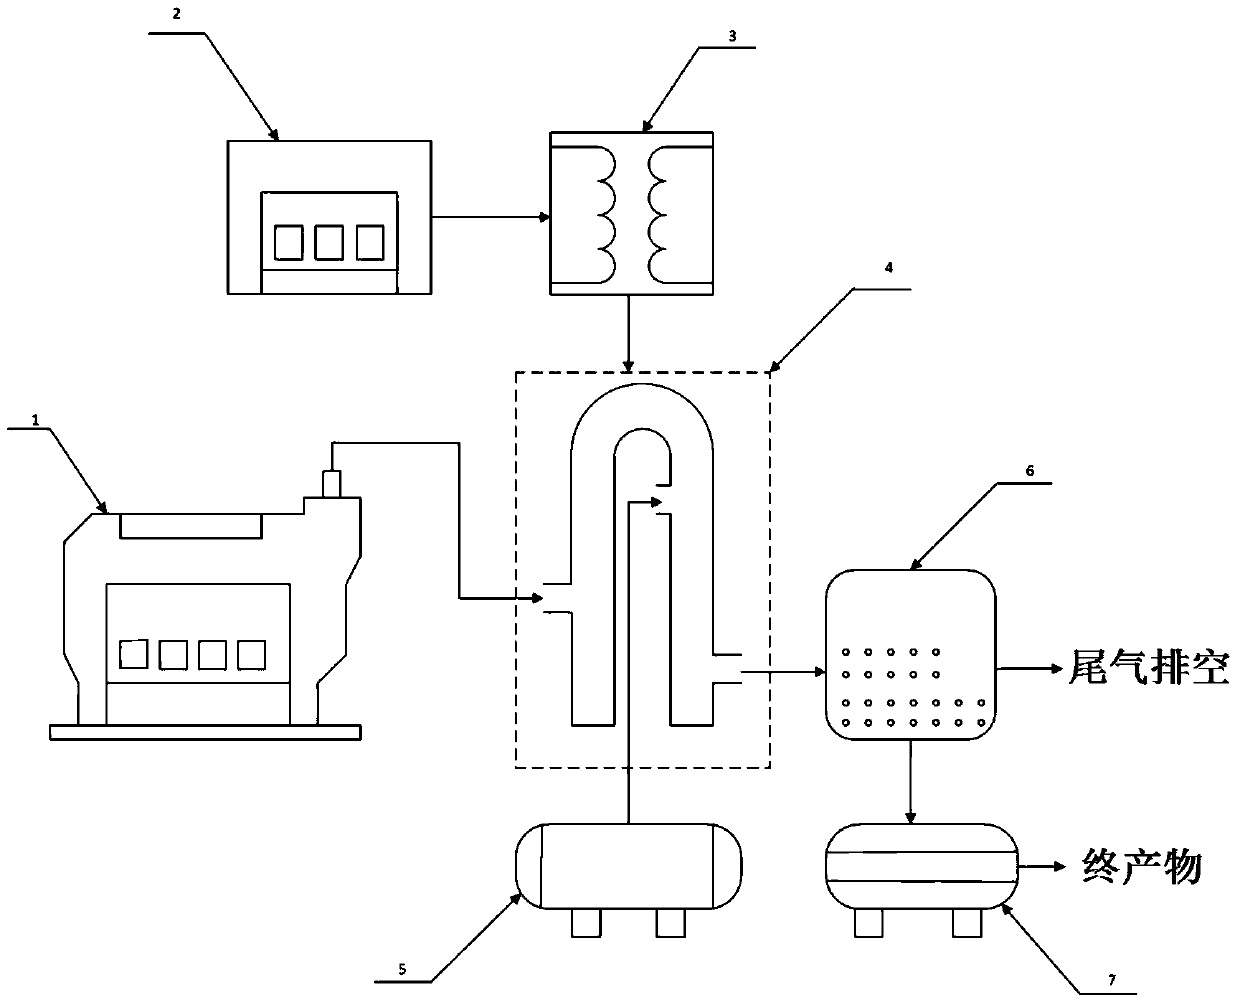 An integrated device for marine diesel engine tail gas desulfurization and denitrification